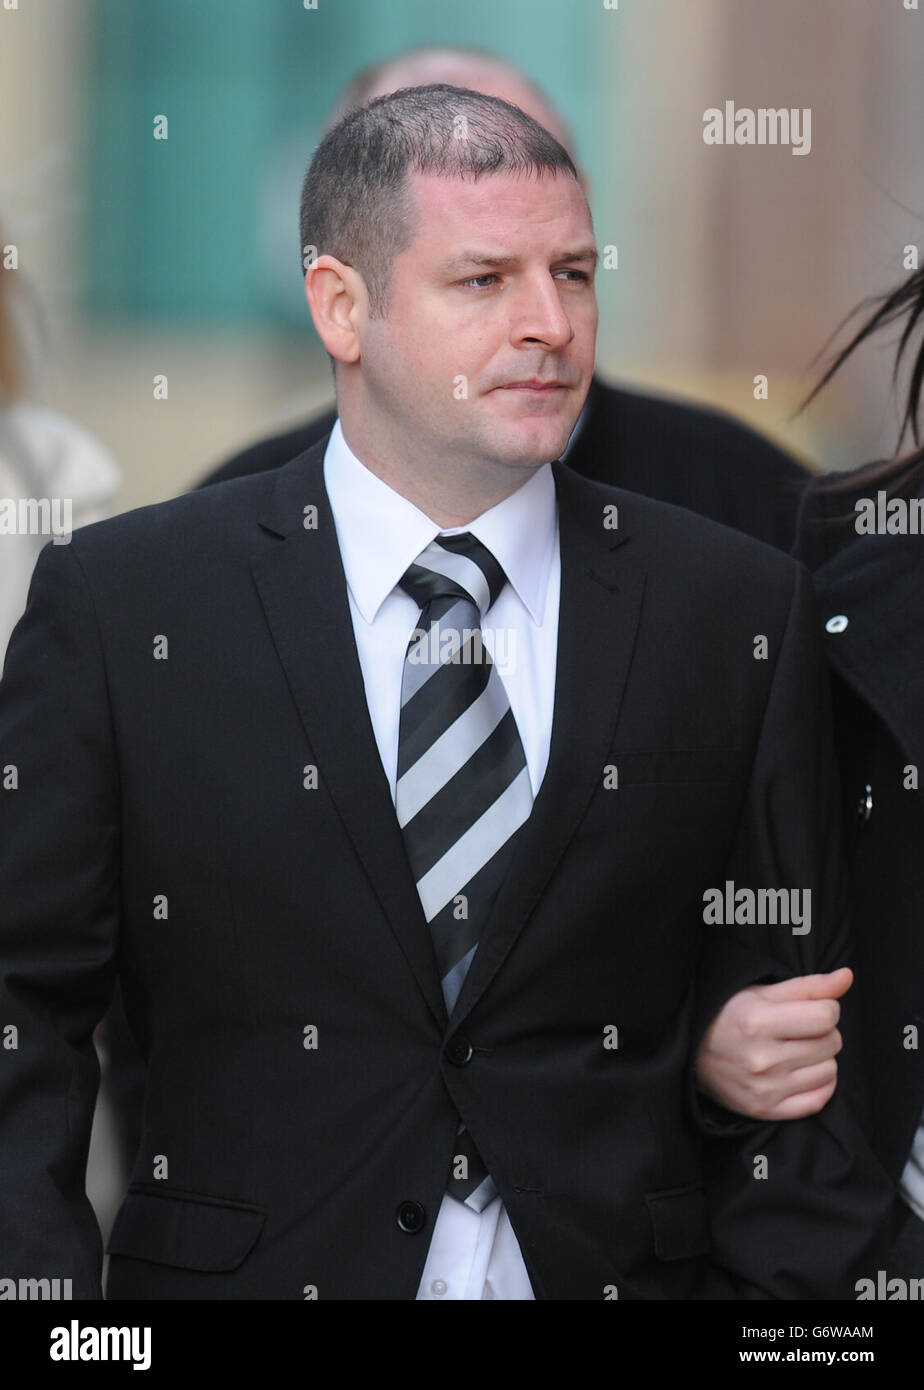 Alan French, 32, arrives at Newcastle Crown Court where he is accused alongside Philip McGilvray, 33, of an attack on the Casualty actor Clive Mantle who had part of his ear bitten off leaving him with a permanent disfigurement. Stock Photo